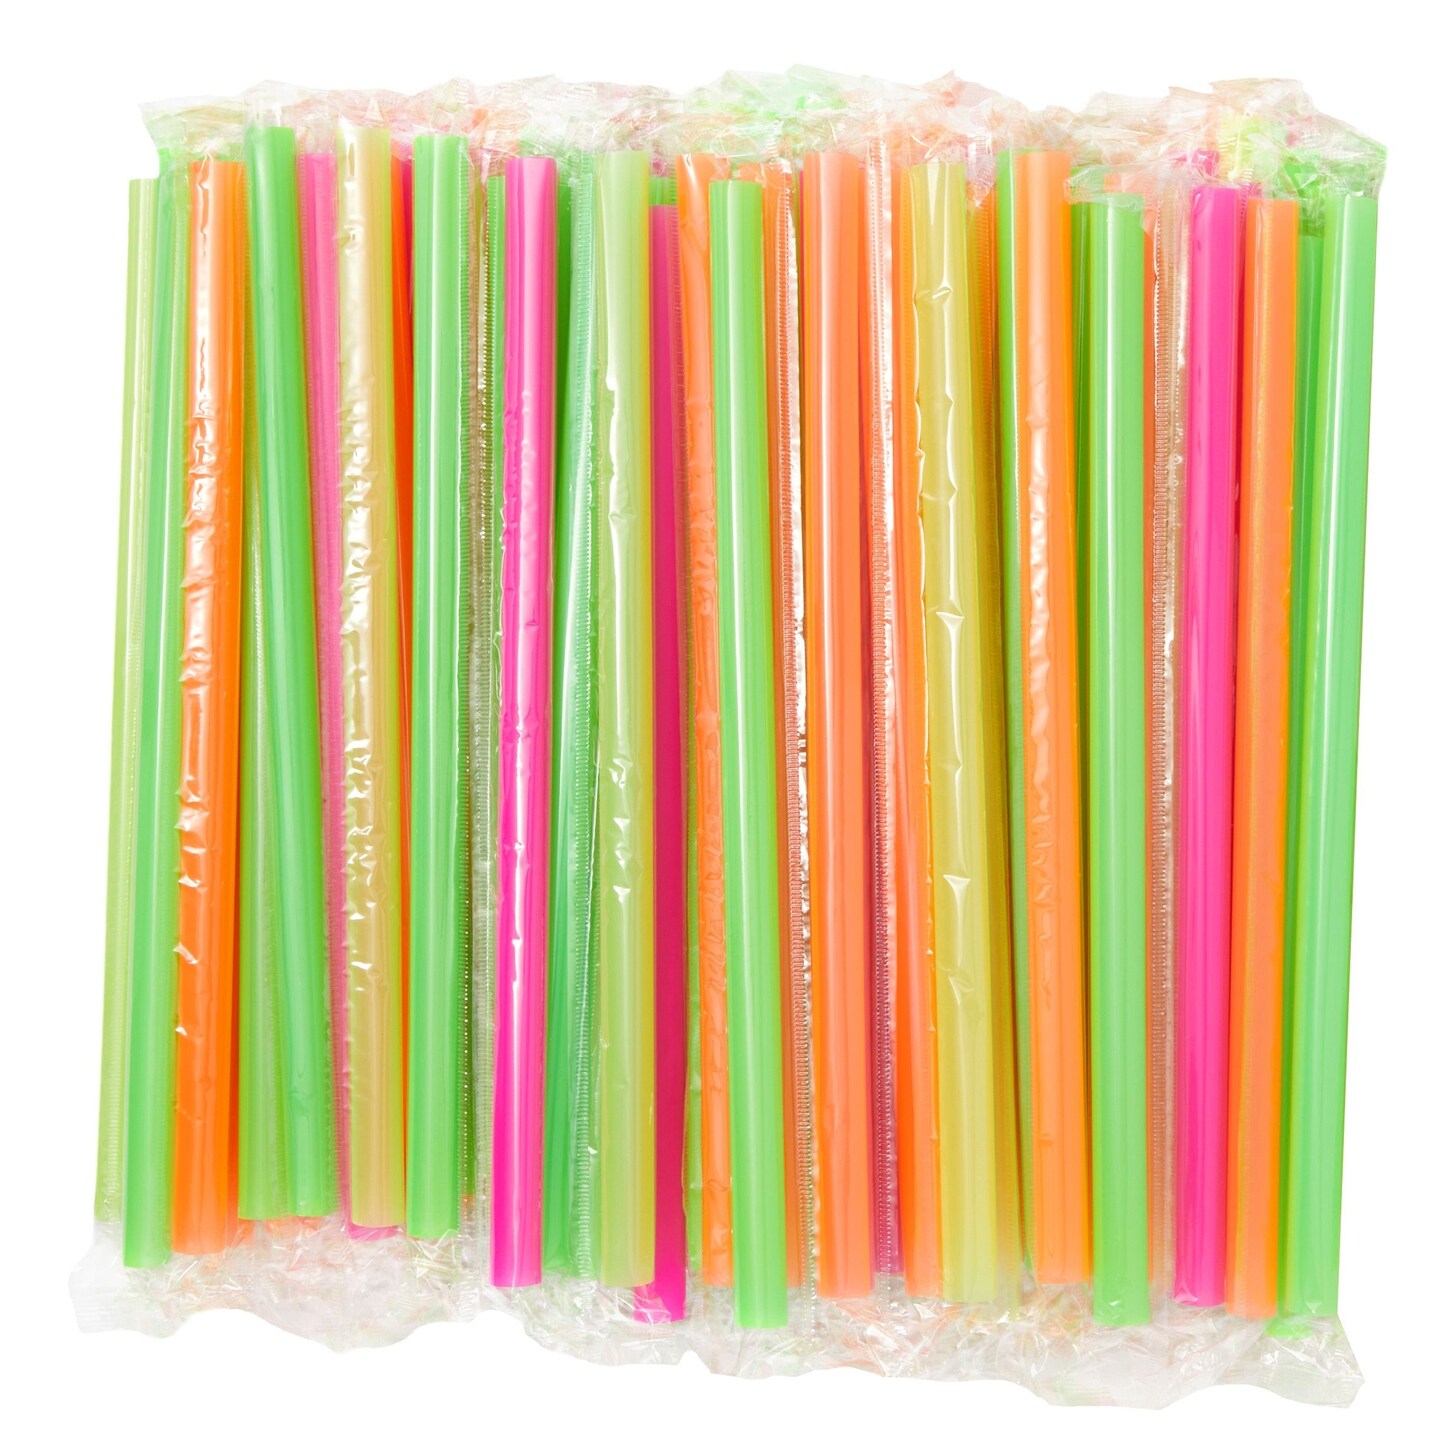  Bubba Big Straw 5 Pack of Reusable Straws (Assorted